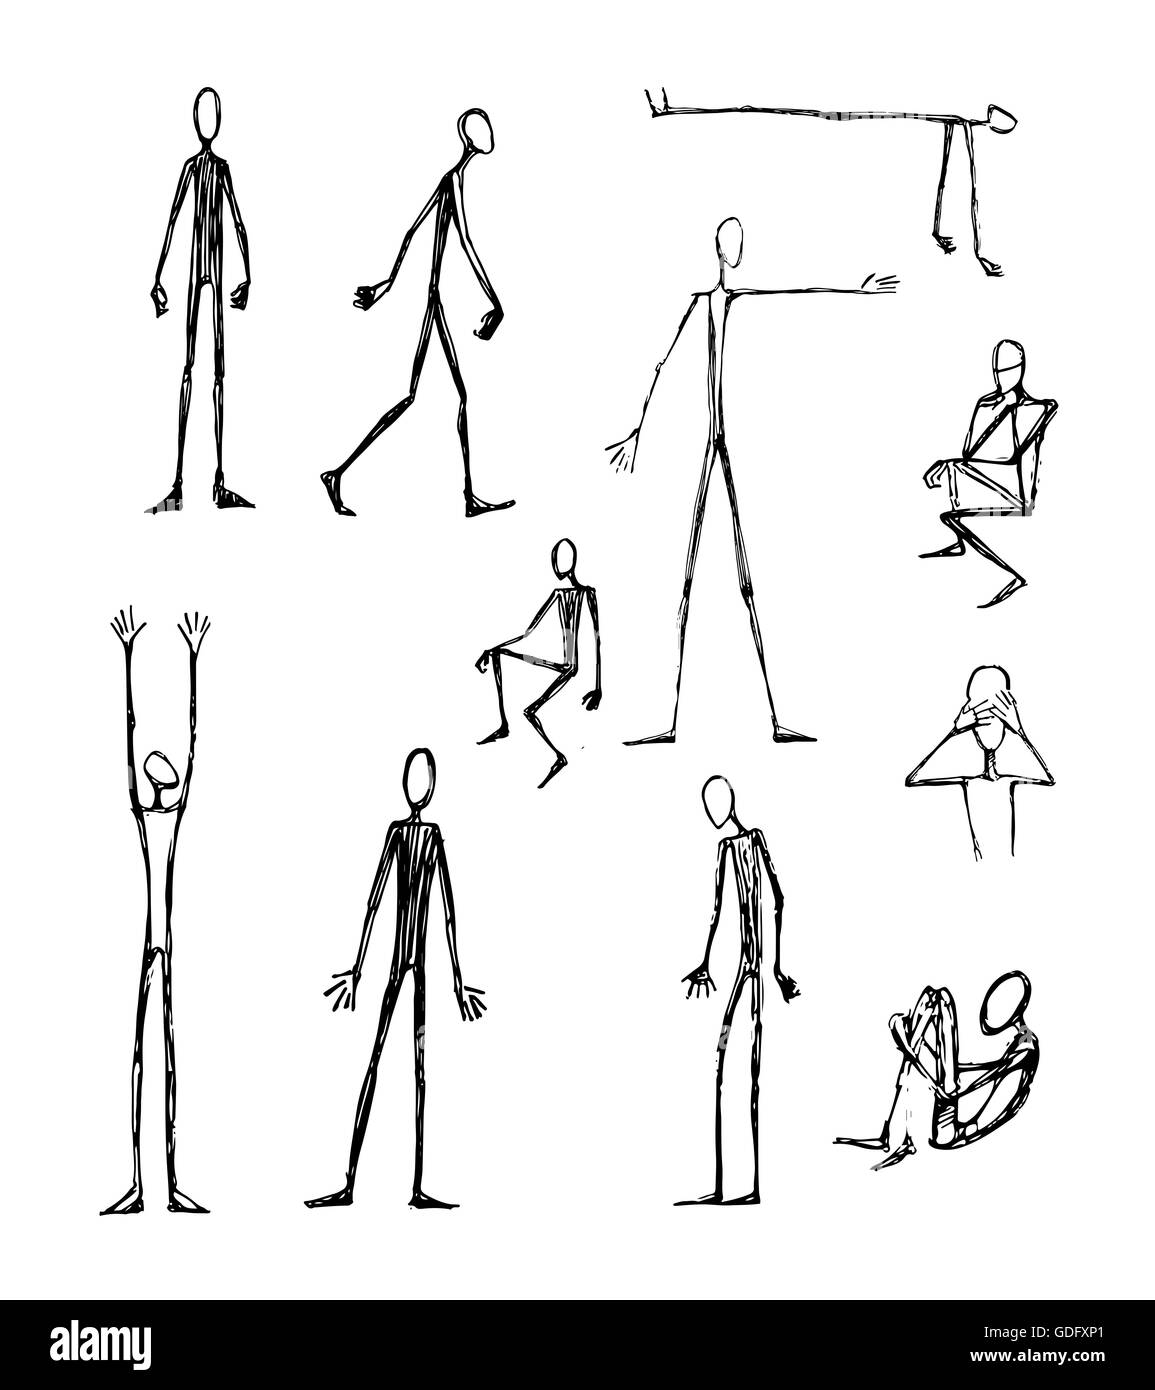 Hand drawn vector illustration or drawing of some men long skinny silhouettes Stock Photo